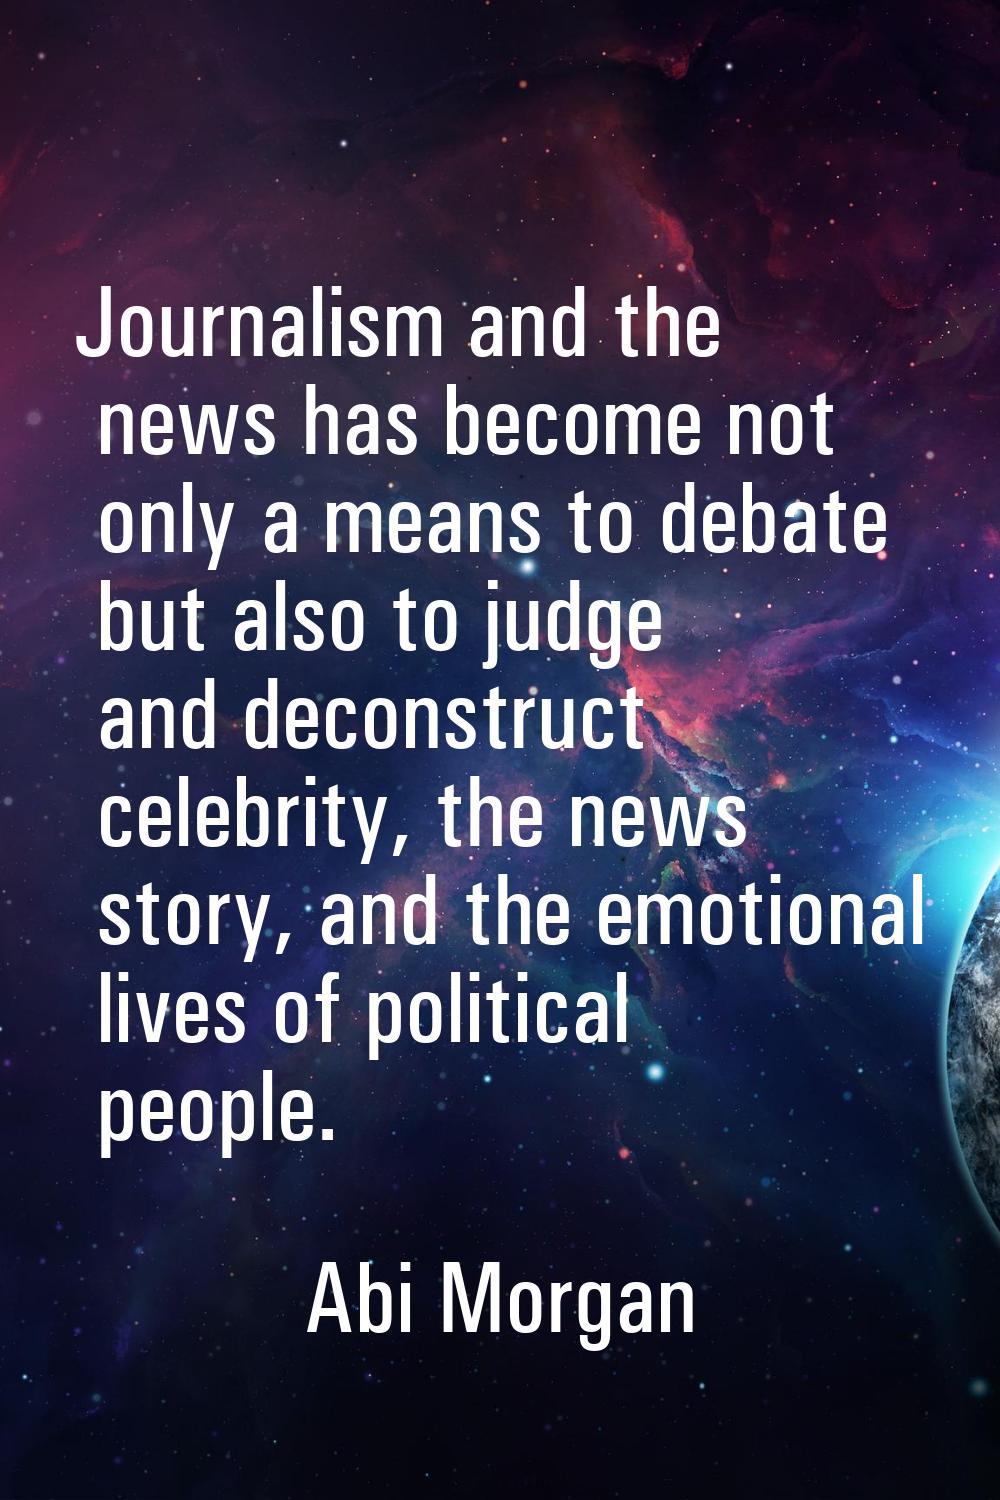 Journalism and the news has become not only a means to debate but also to judge and deconstruct cel